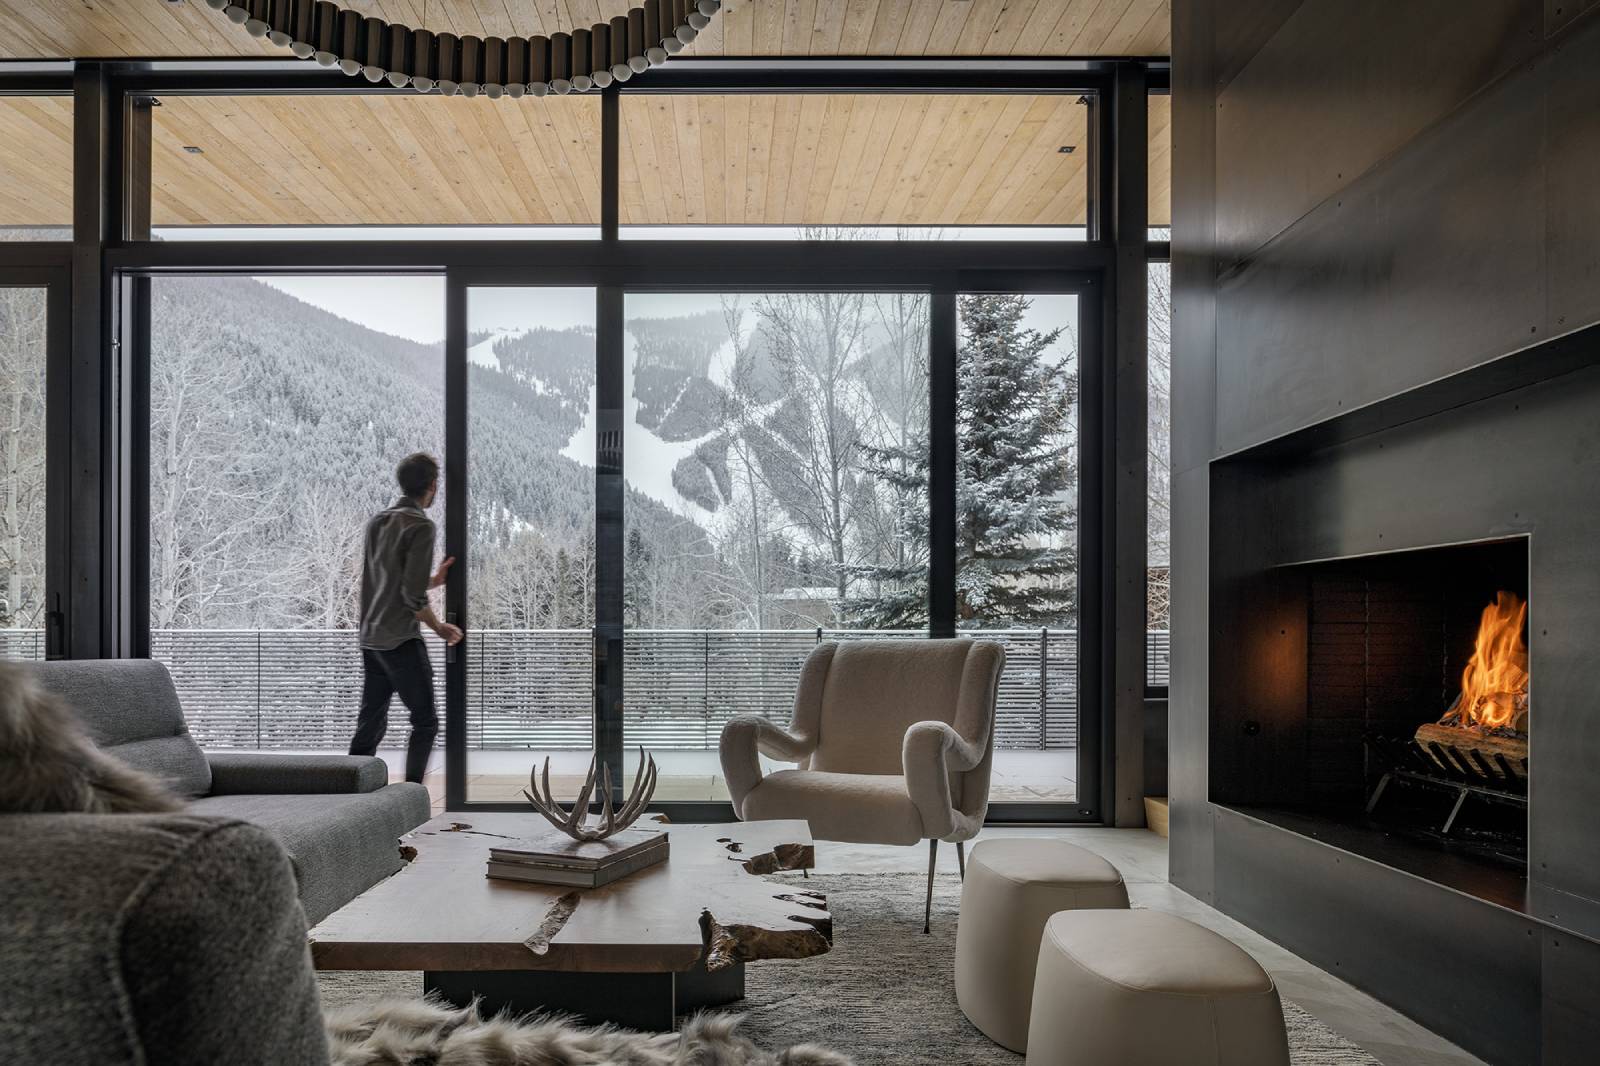 Interior view of the living room and deck at Avalanche Chalet, a custom home designed and built by Farmer Payne Architects.